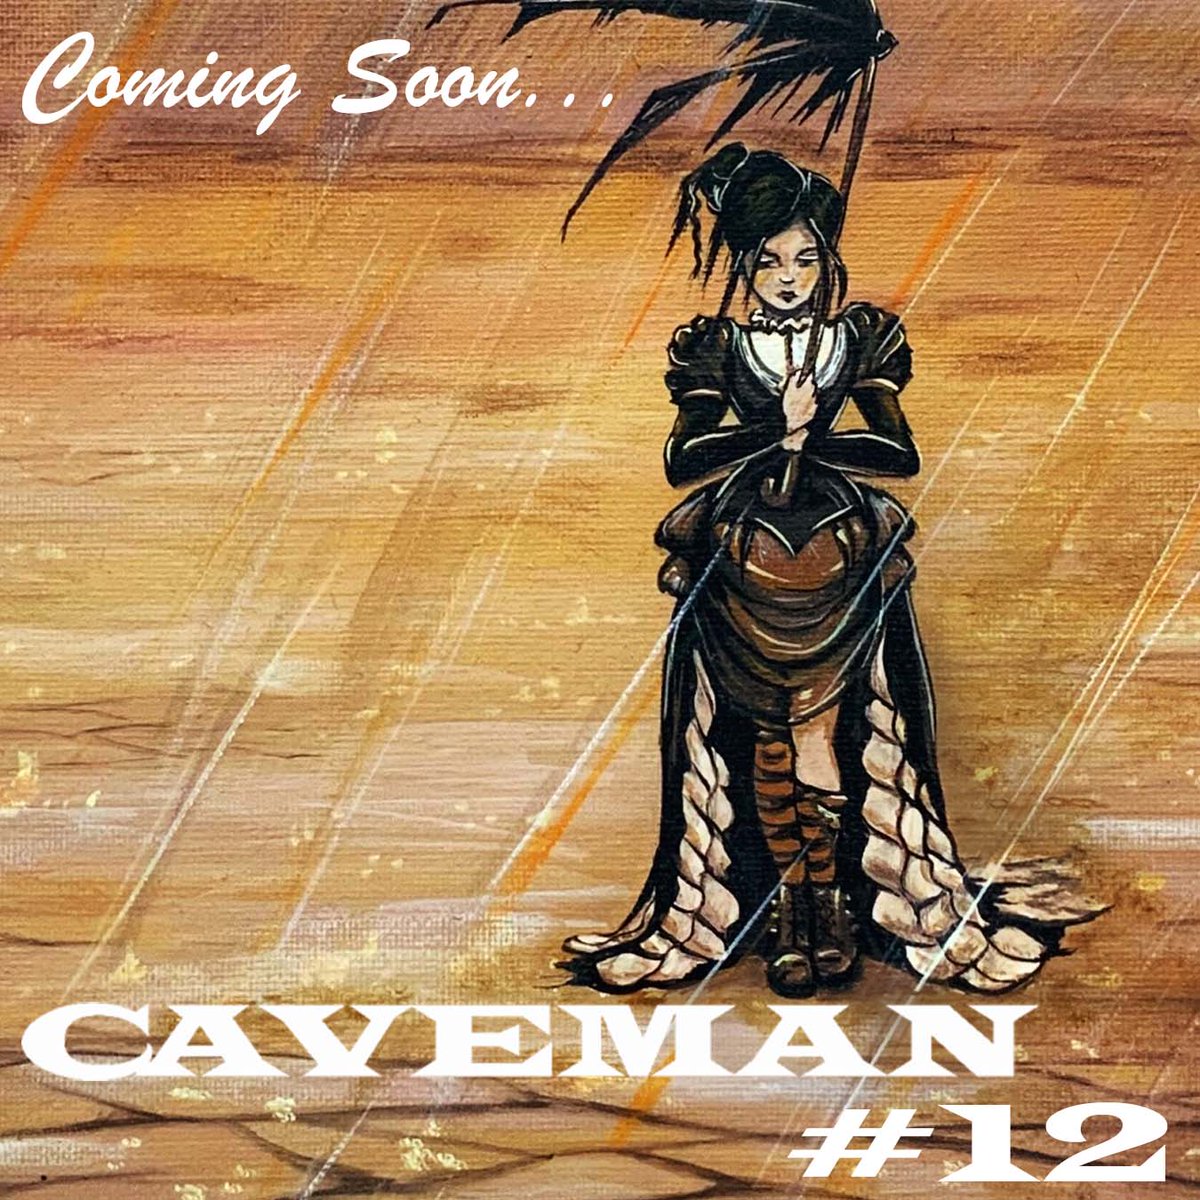 The delayed continuation of my story 'First Rodeo' will be appearing in the new issue of CAVEMAN, which will be available for pre-order on Monday!
.
.
#shortstory #pulpfiction #weirdwestern #western #weird #mensadventure #mensmagazine